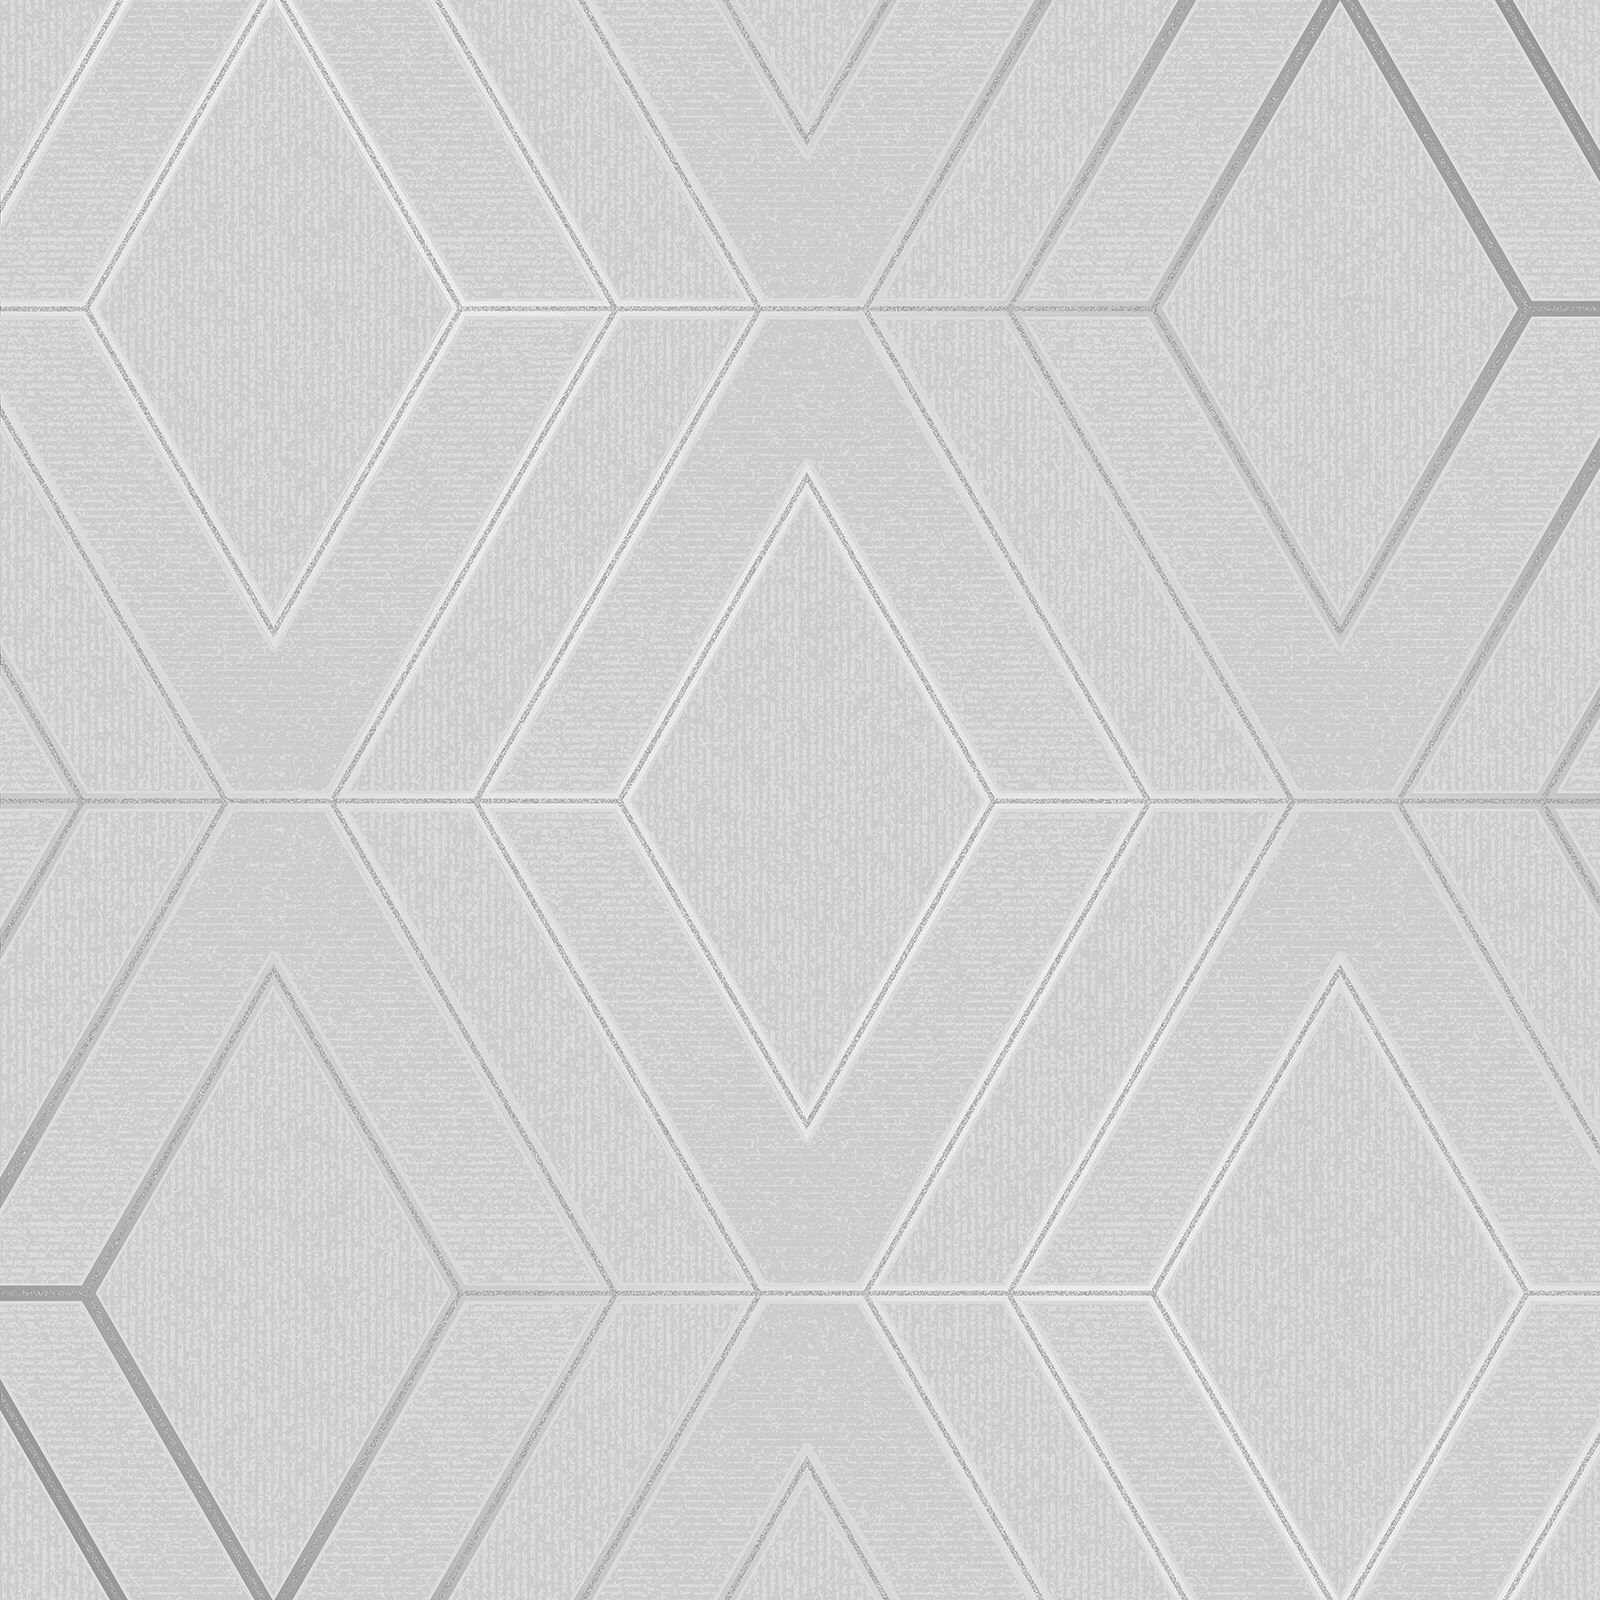 Kylie Minogue at Home Wallpaper Diamond Textures 709004 Silver 